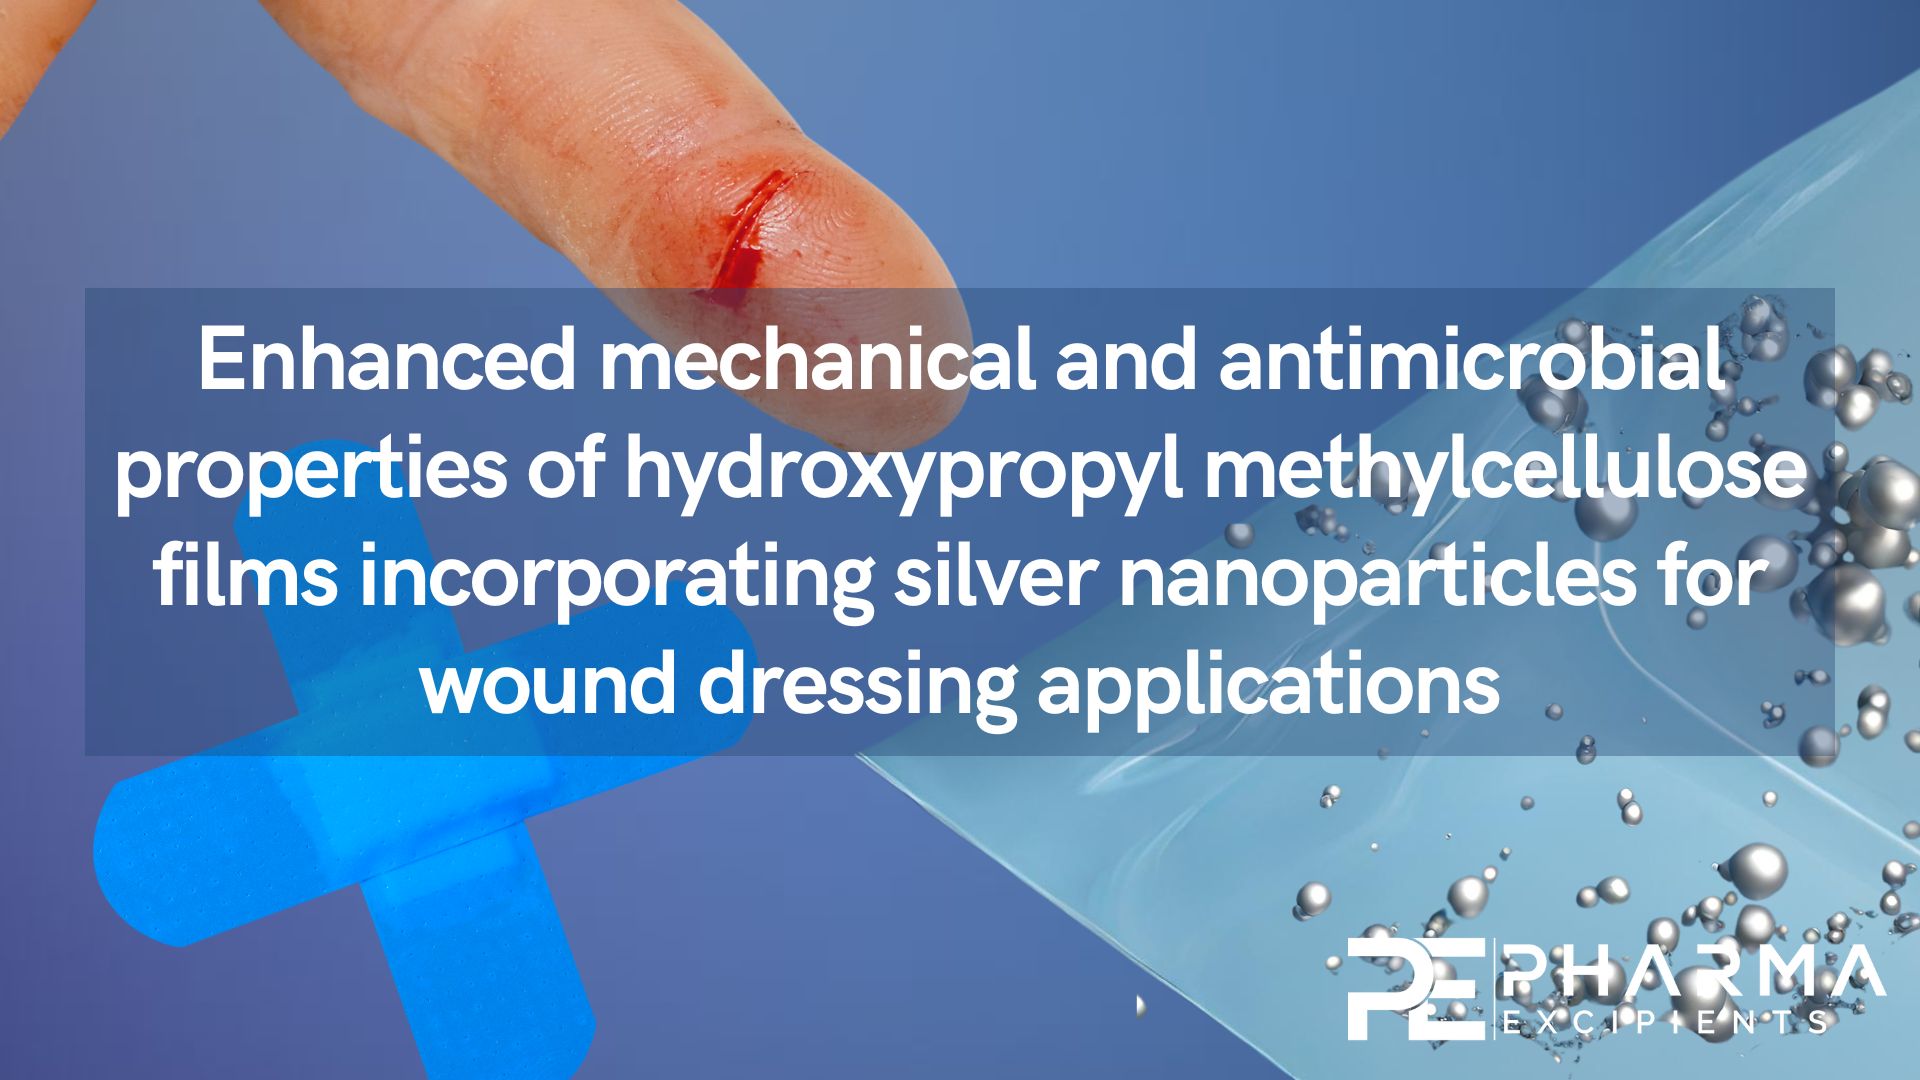 Enhanced-mechanical-and-antimicrobial-properties-of-hydroxypropyl-methylcellulose-films-incorporating-silver-nanoparticles-for-wound-dressing-applications